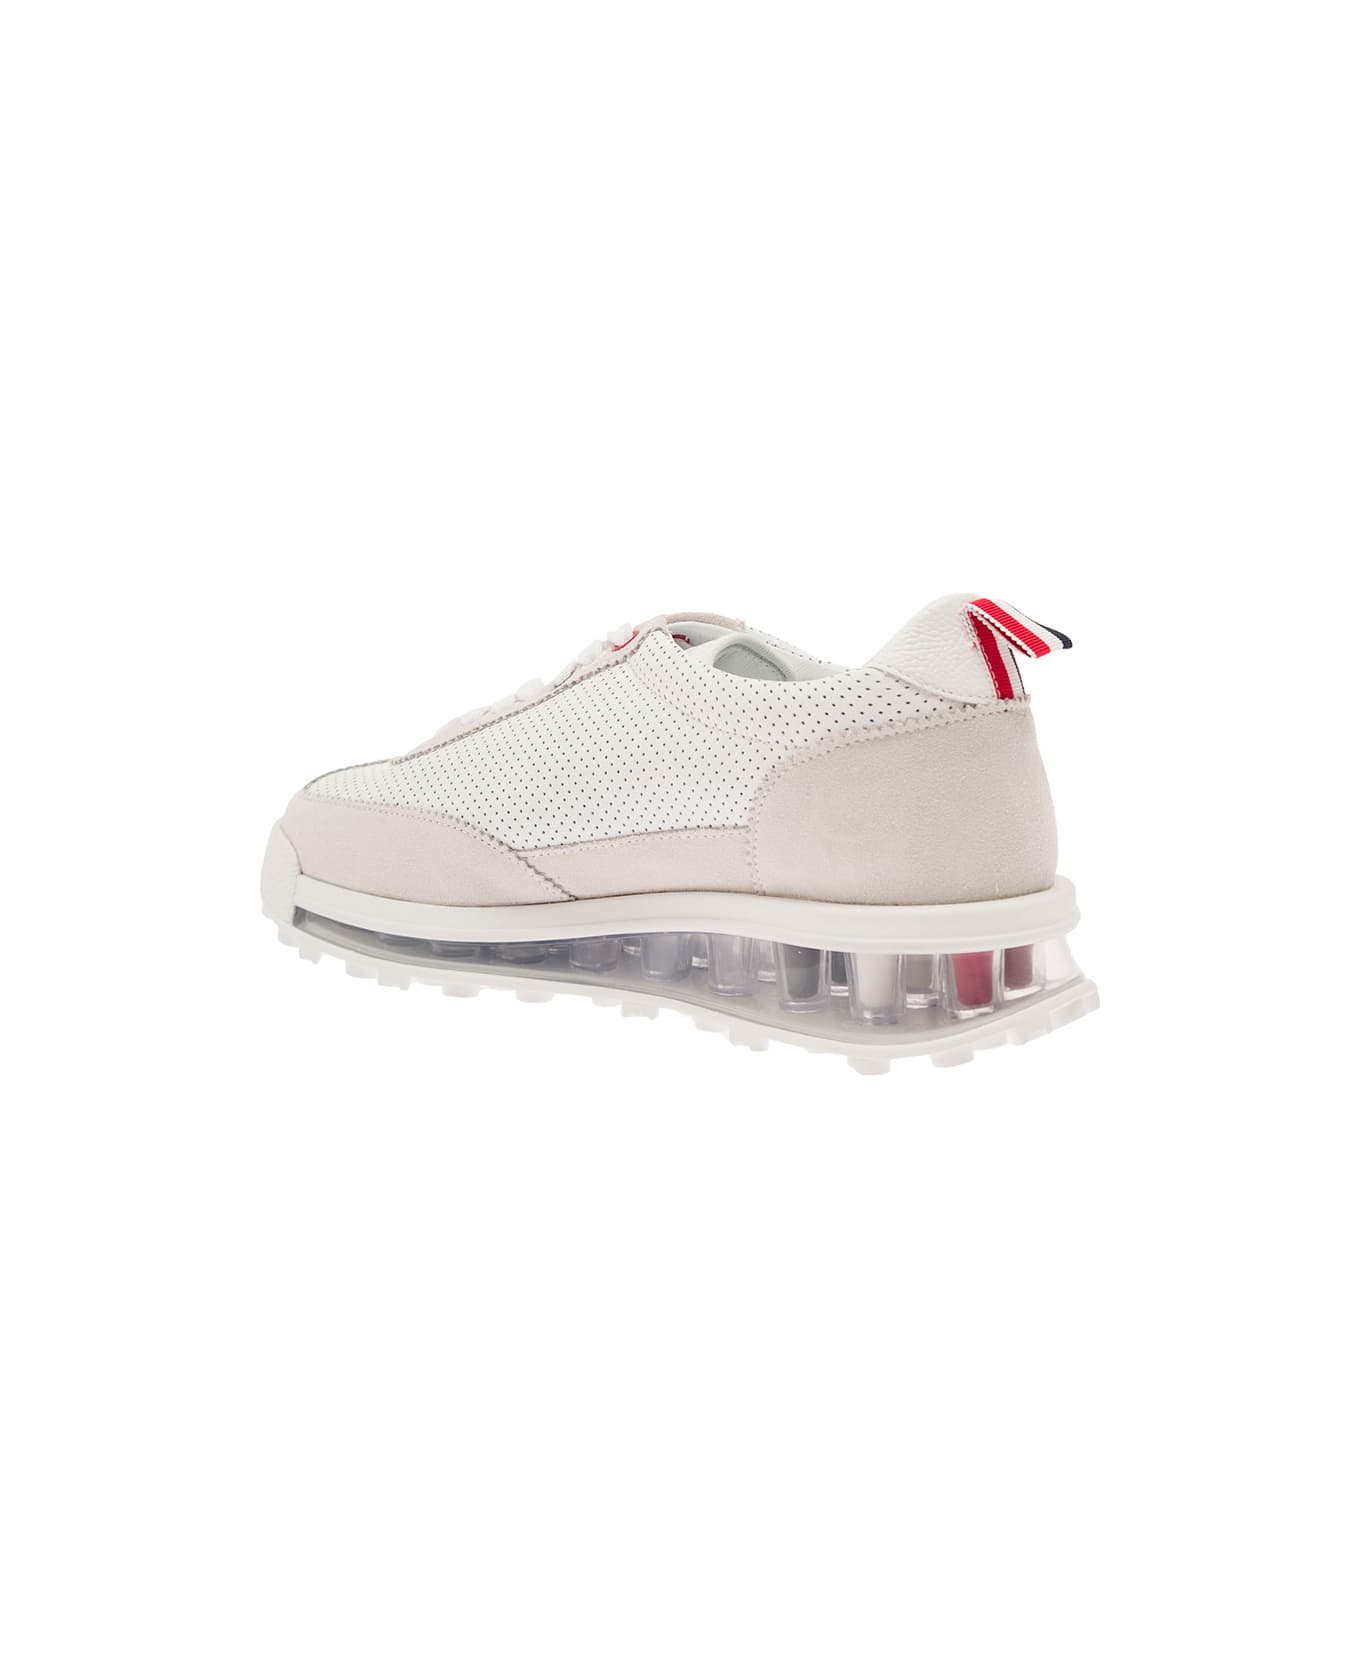 Thom Browne Low Top Tech Sneakers In White Leather Woman - White